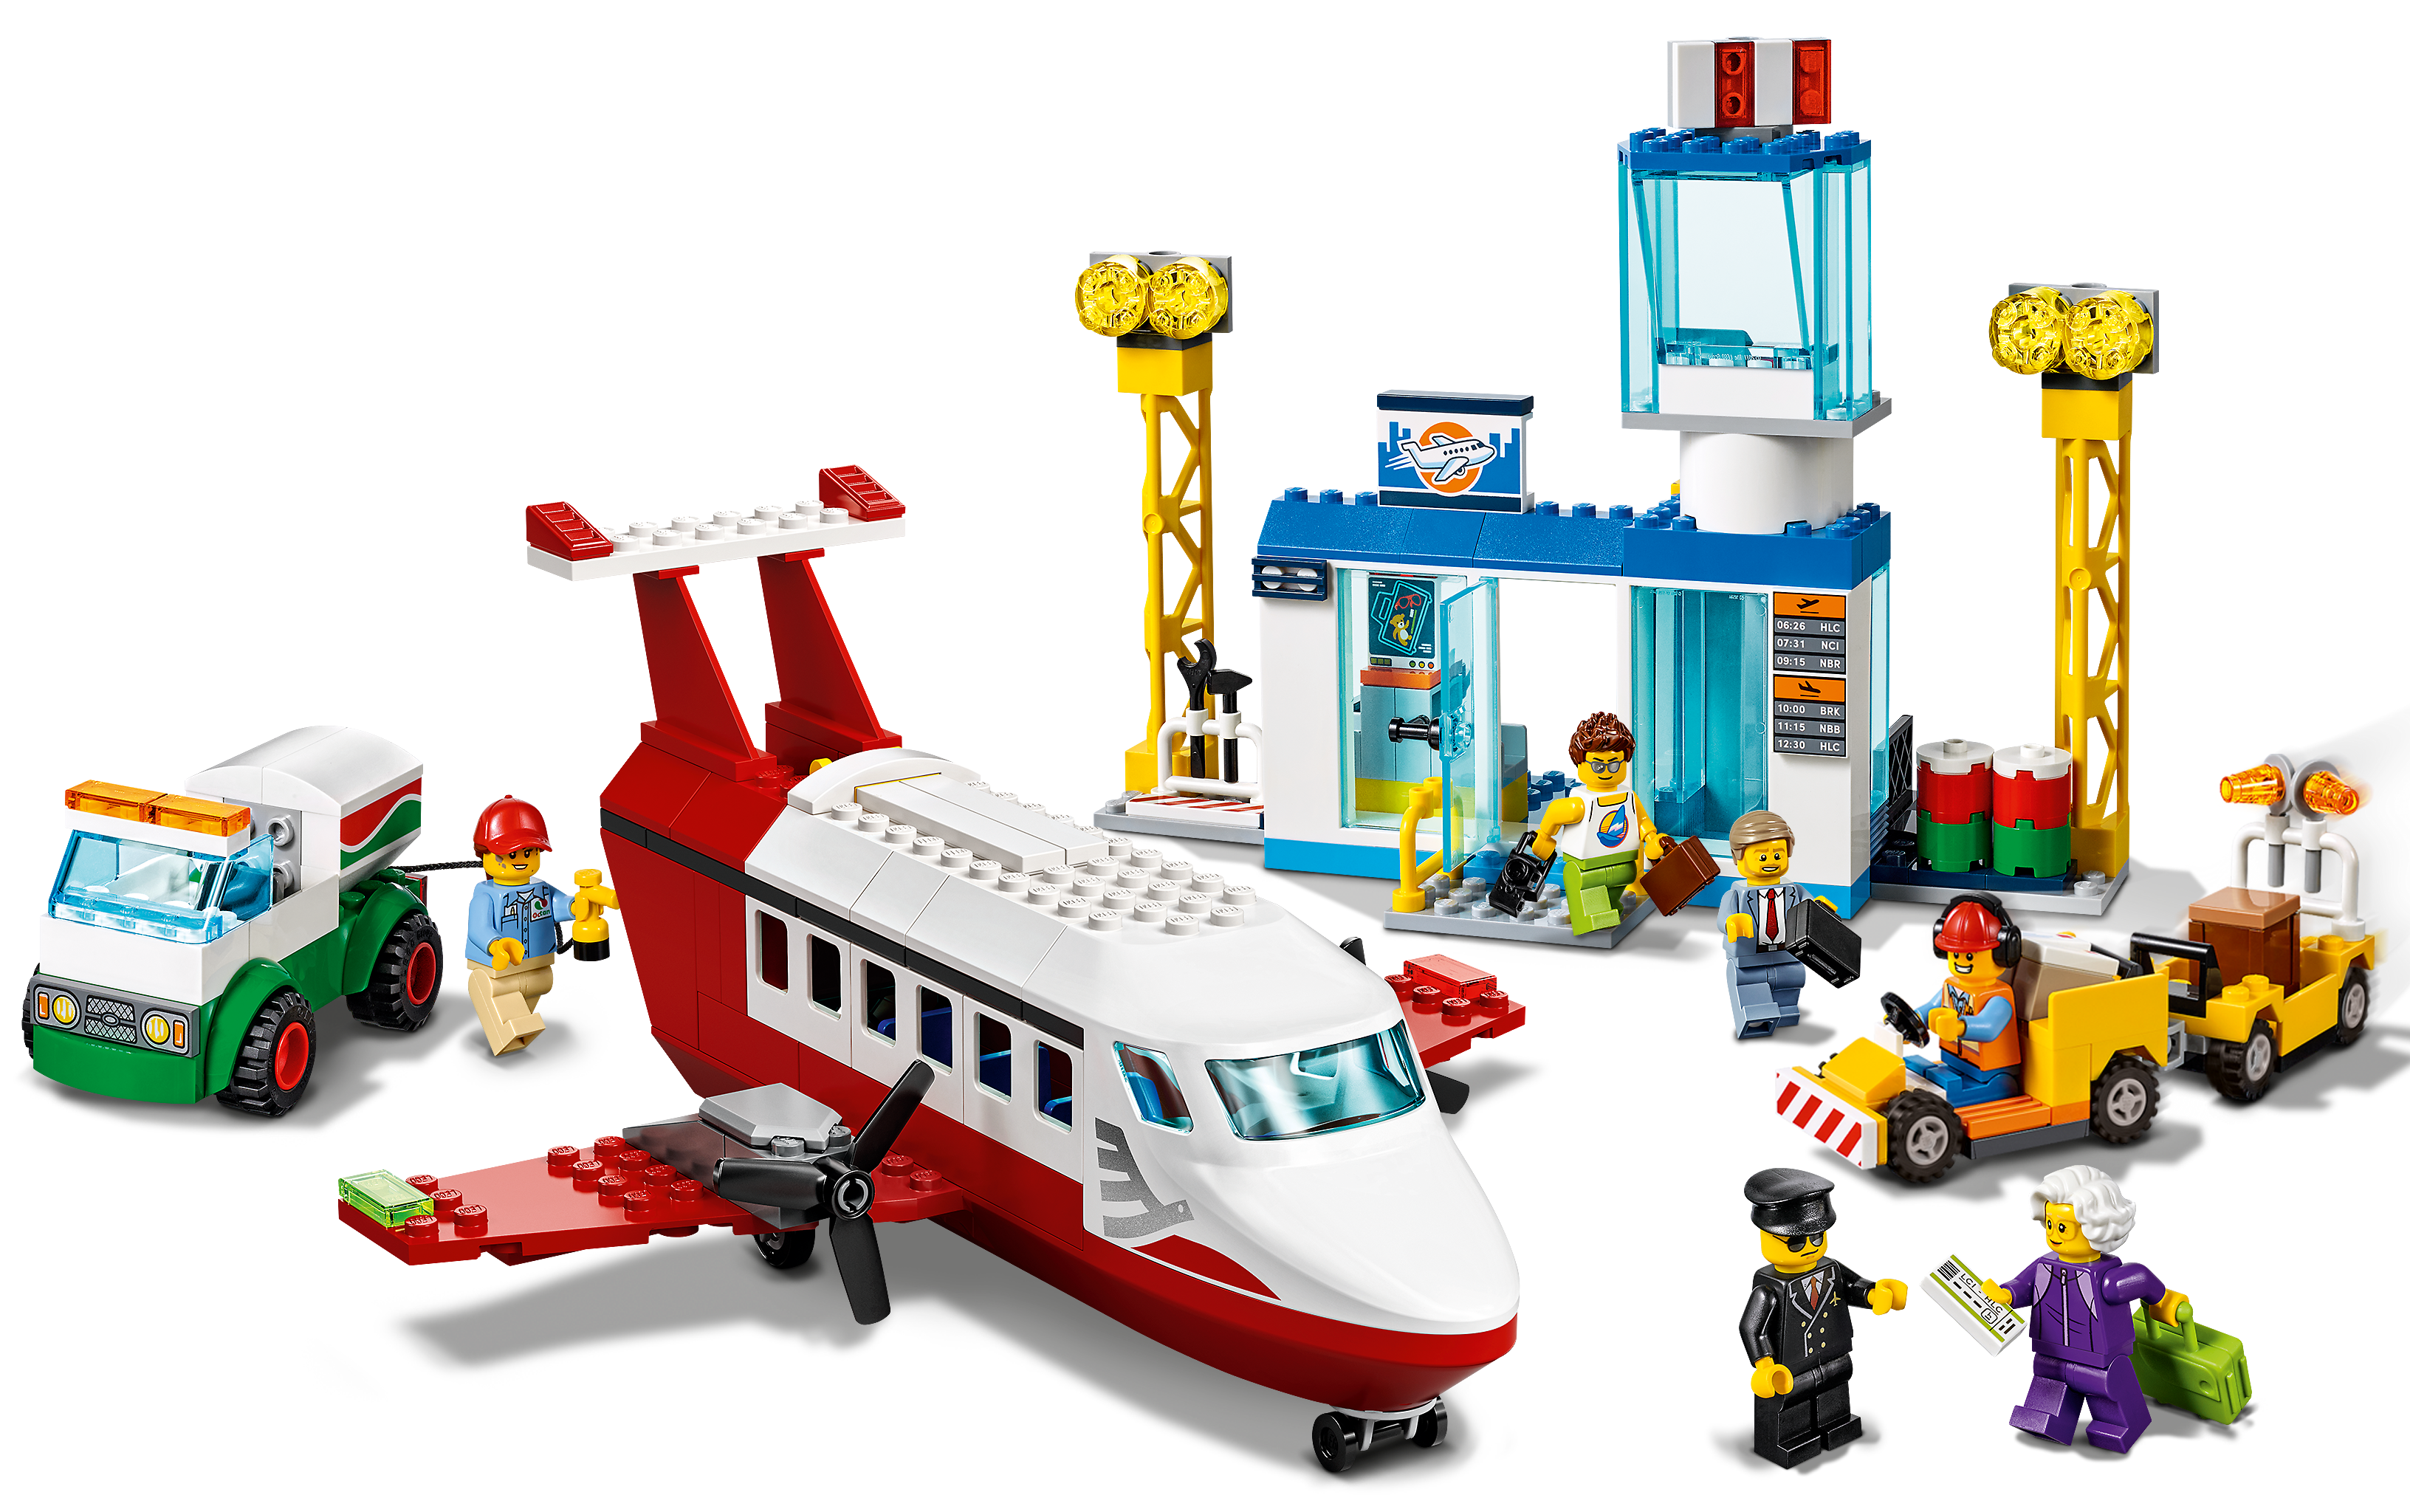 60261 LEGO CITY Central Airport Airplane Charter Plane Set 286 Pieces Age 4+ 